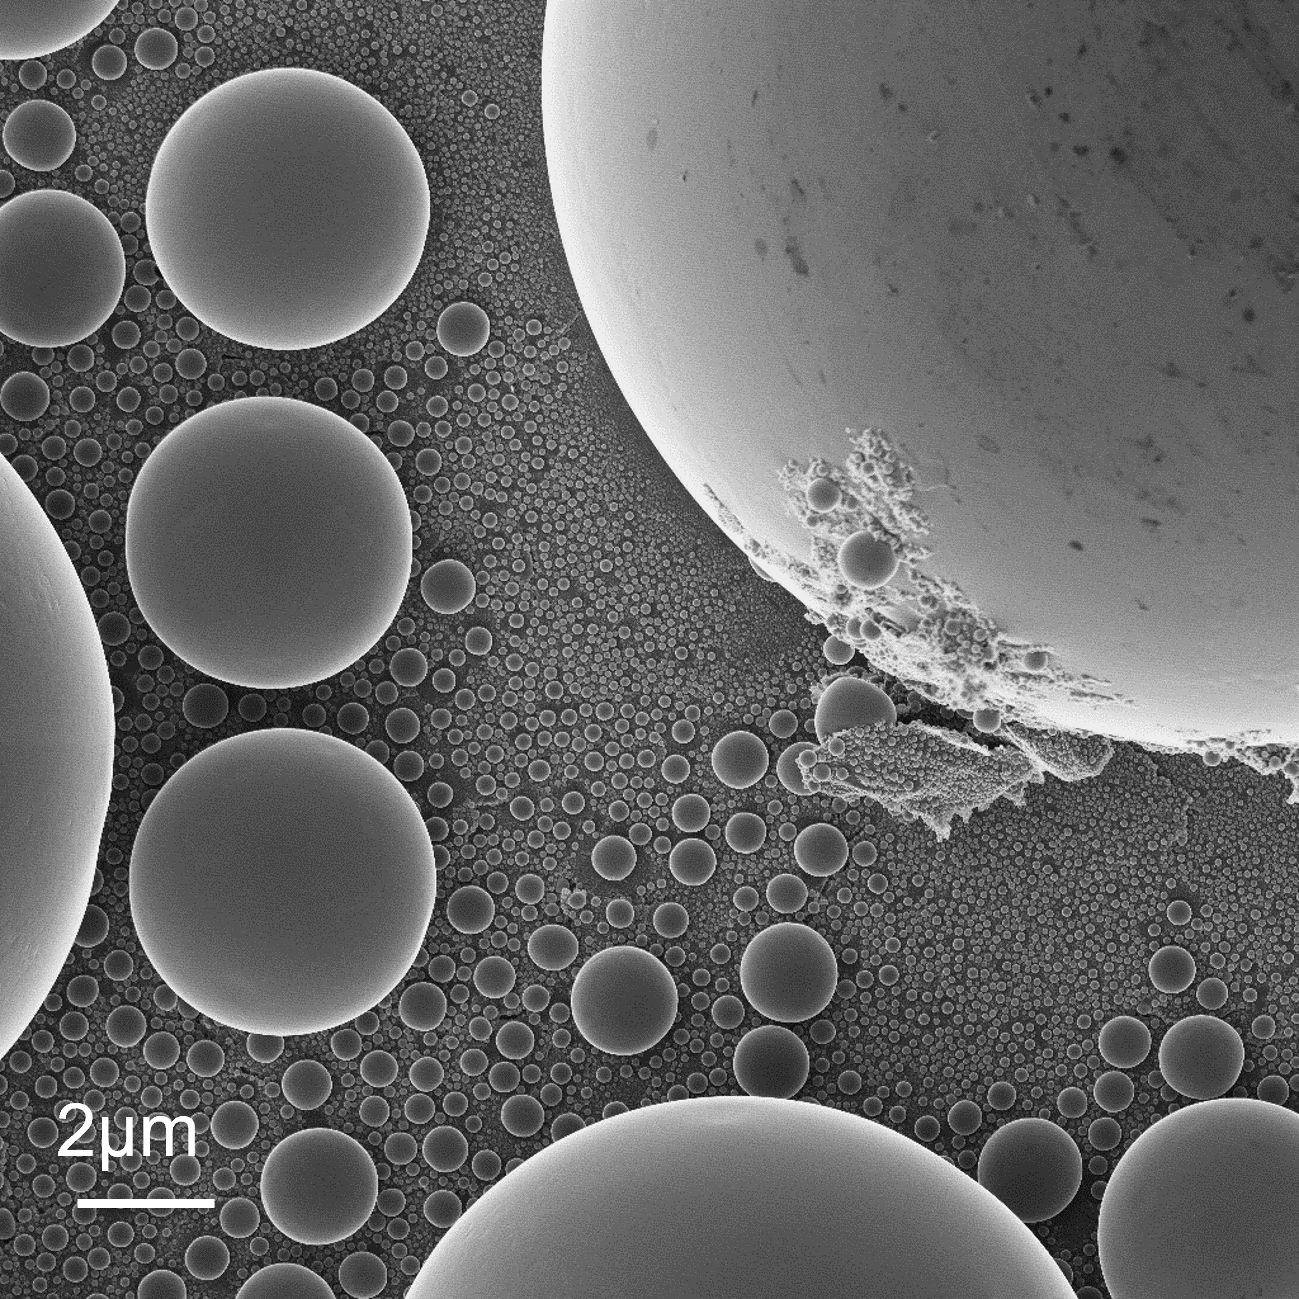 Lithium ion image of tin balls on carbon substrate